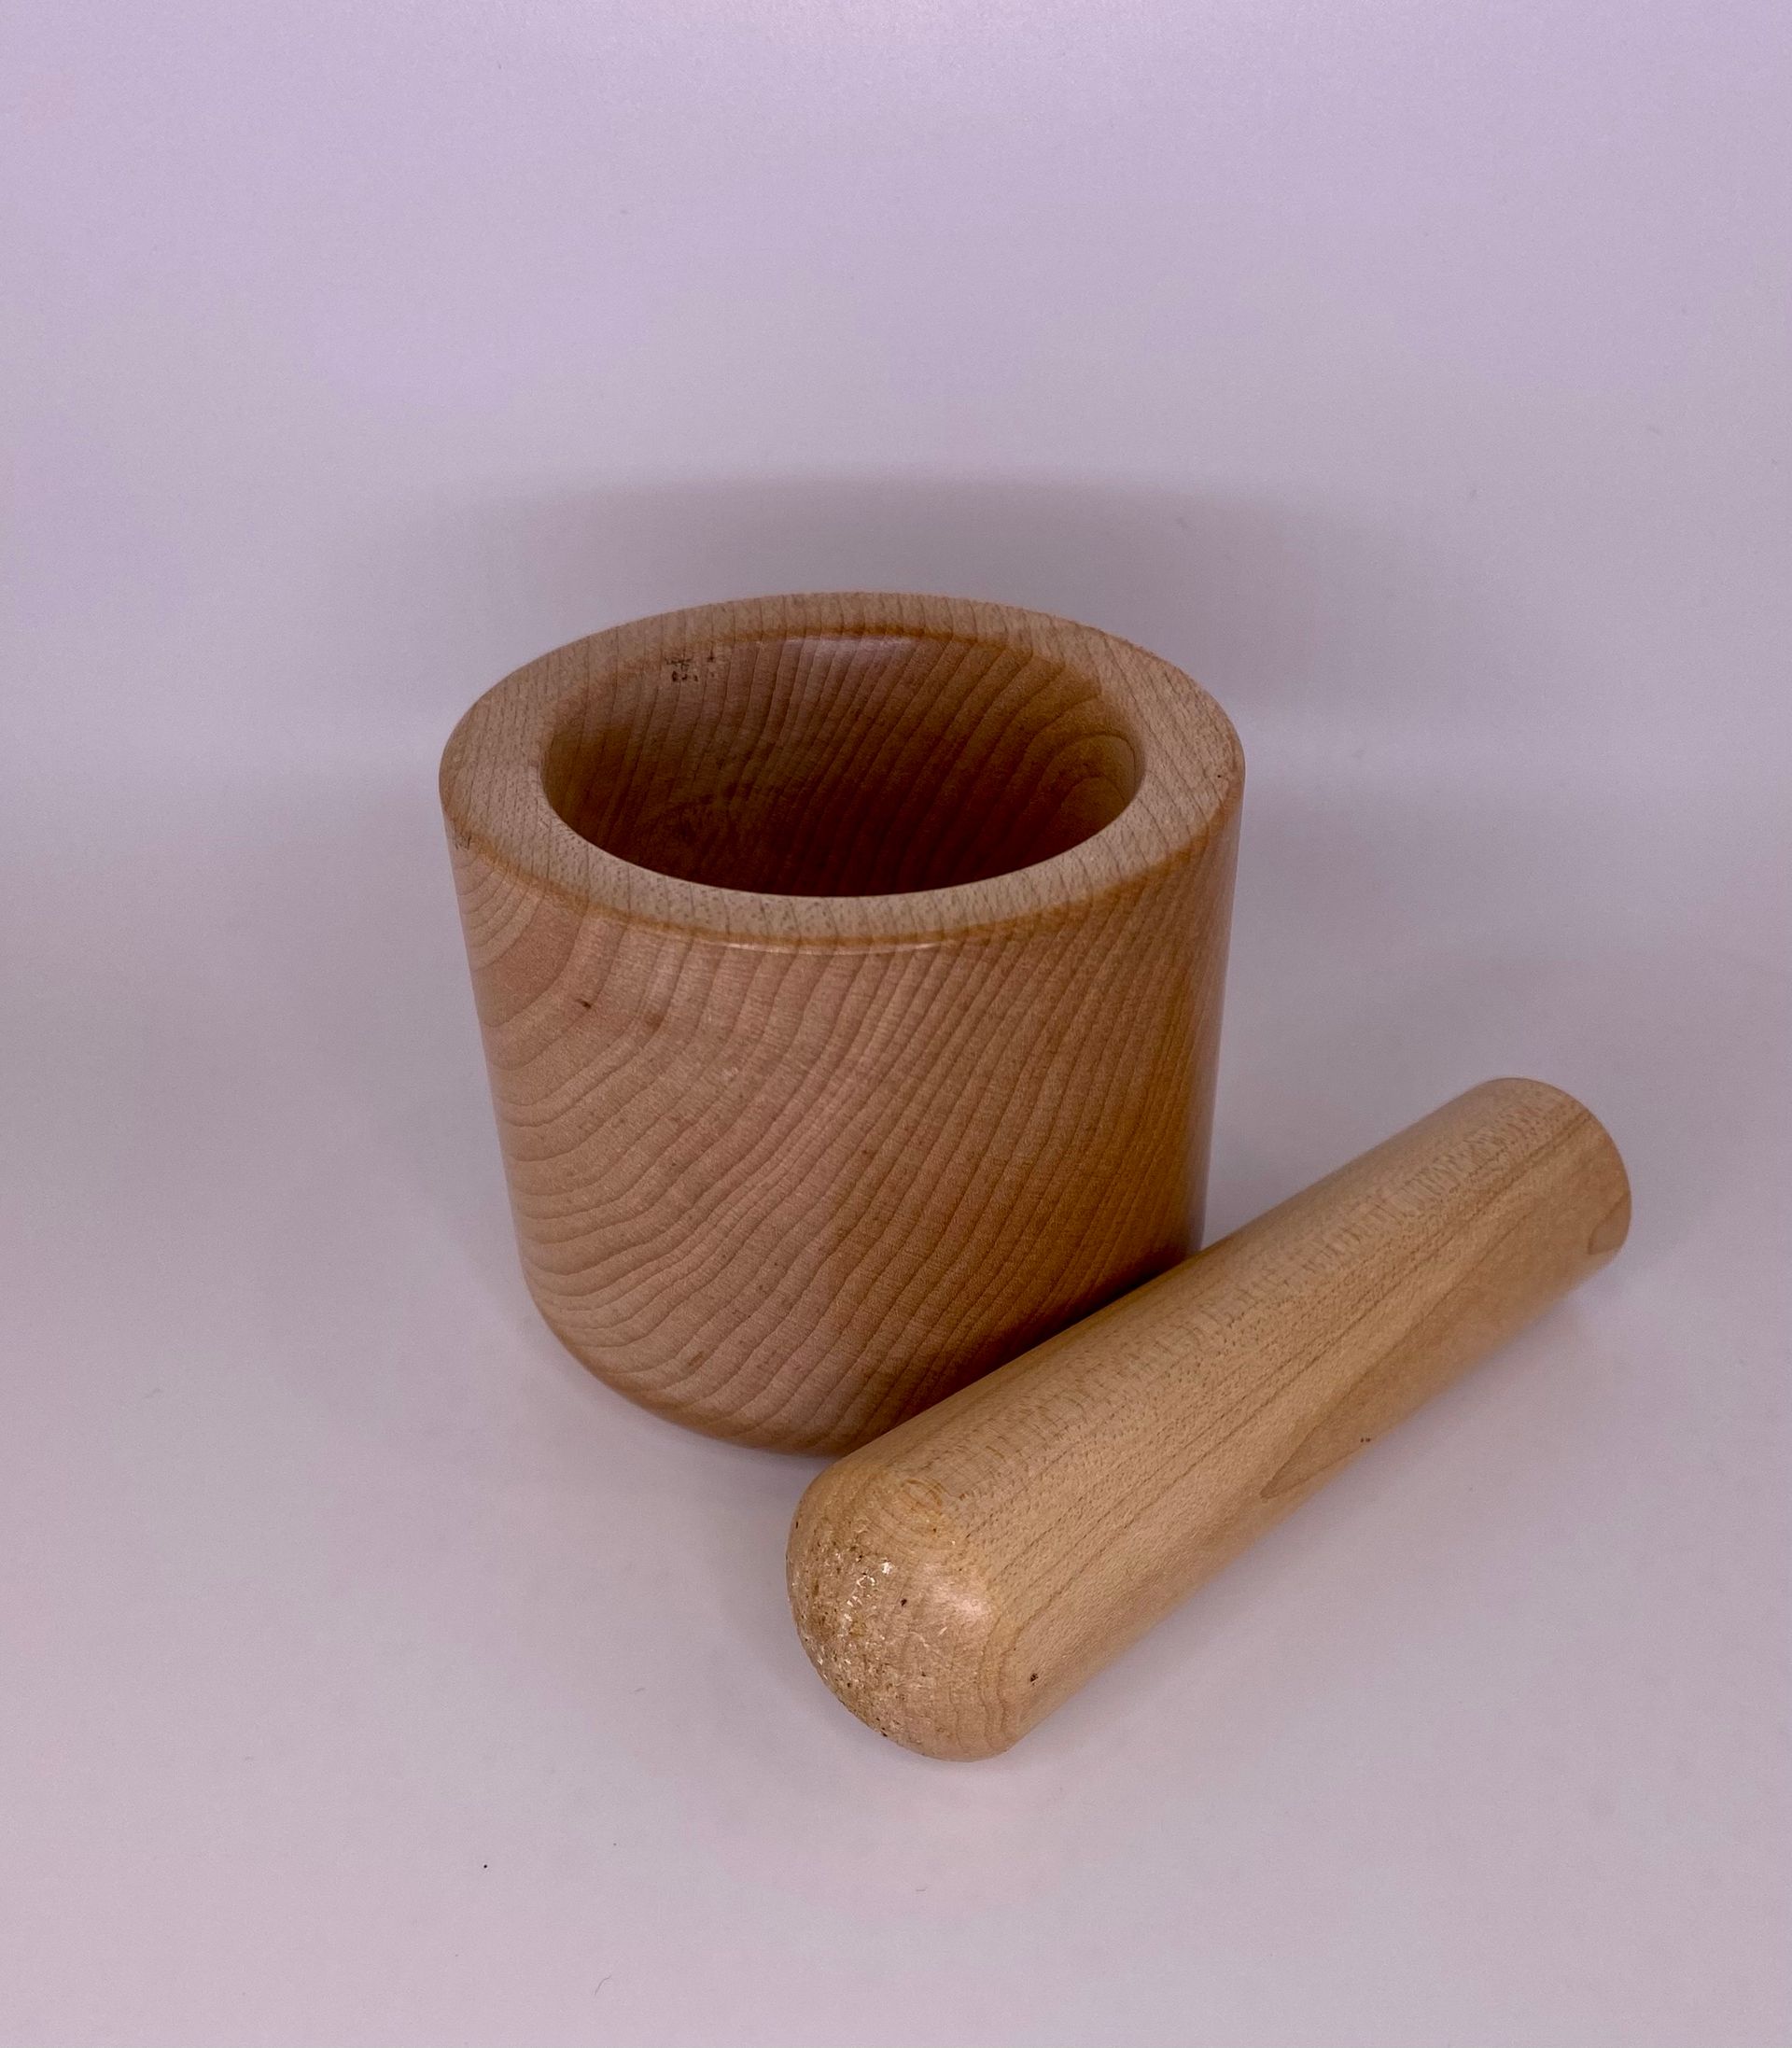 finished mortar and pestles